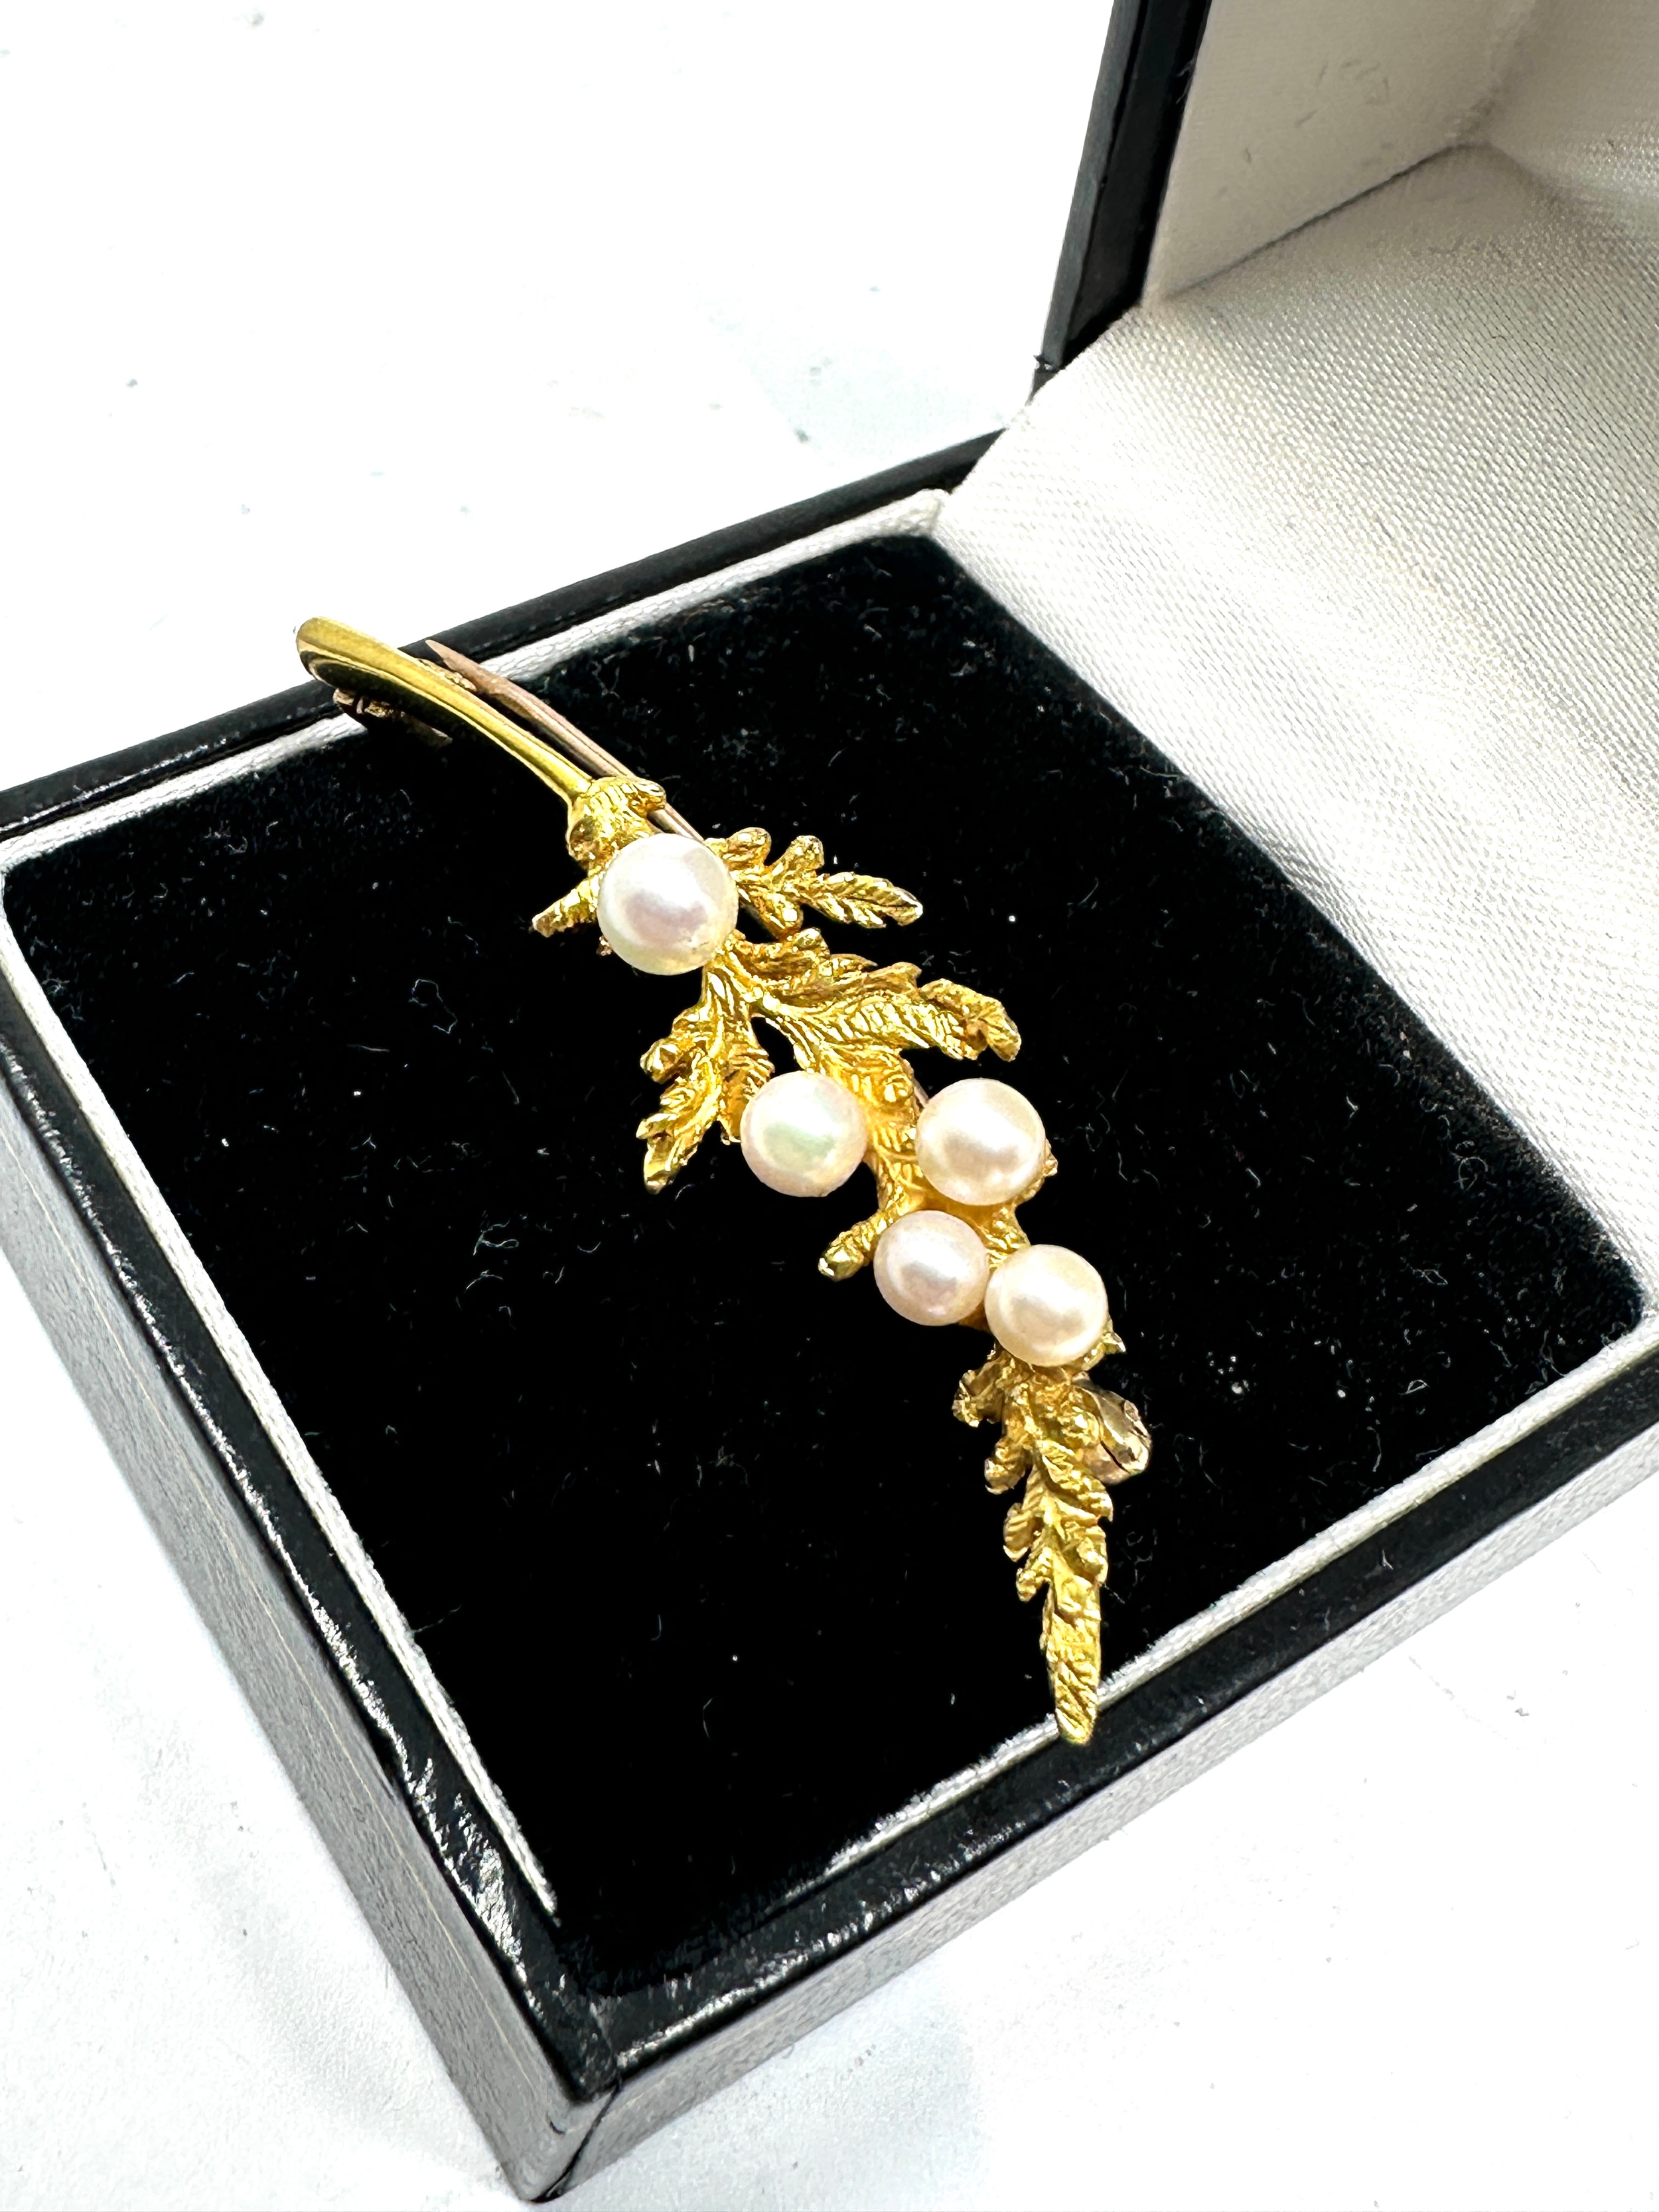 9ct gold leaf design & pearl brooch weight 3g - Image 2 of 3